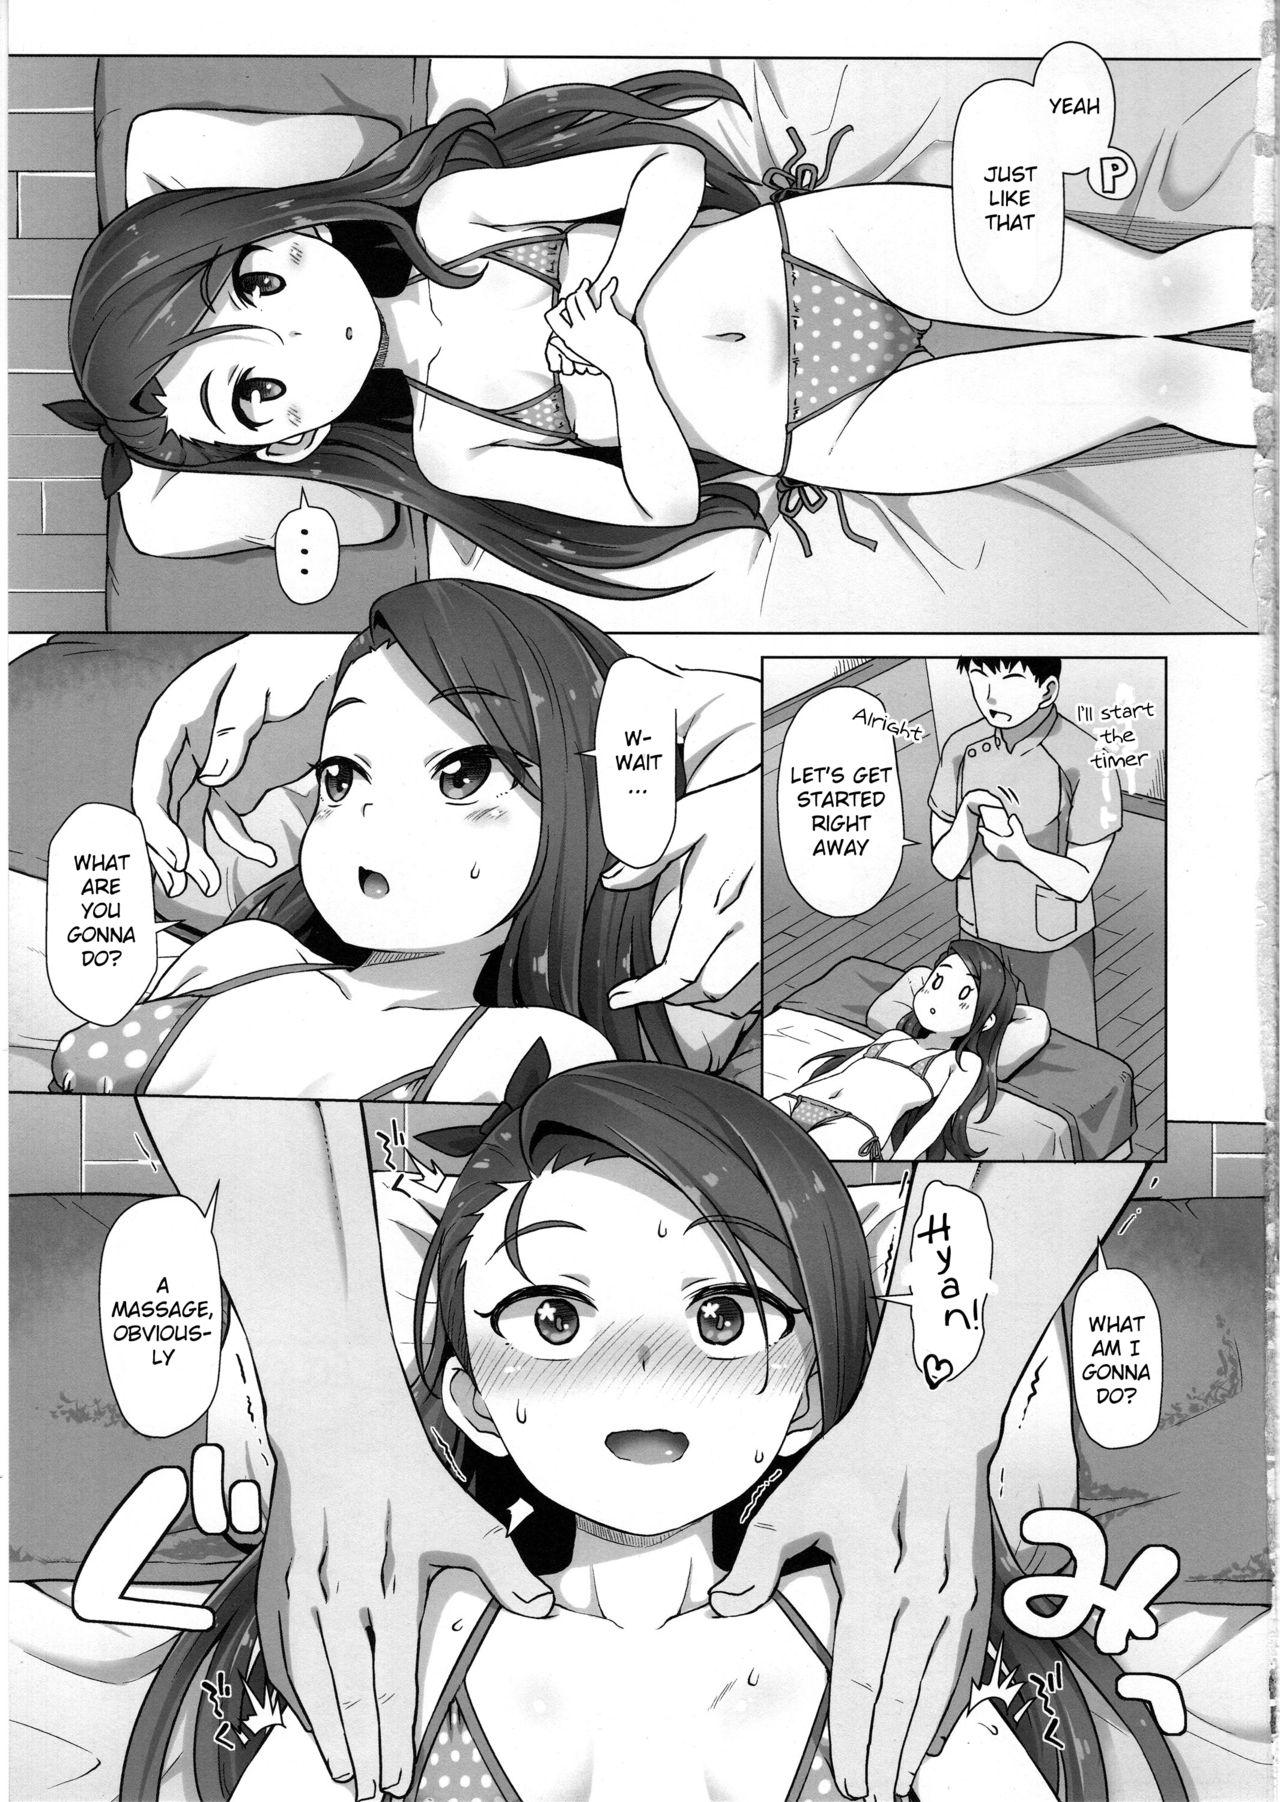 Japan IORIX BODY CARE - The idolmaster Wrestling - Page 4